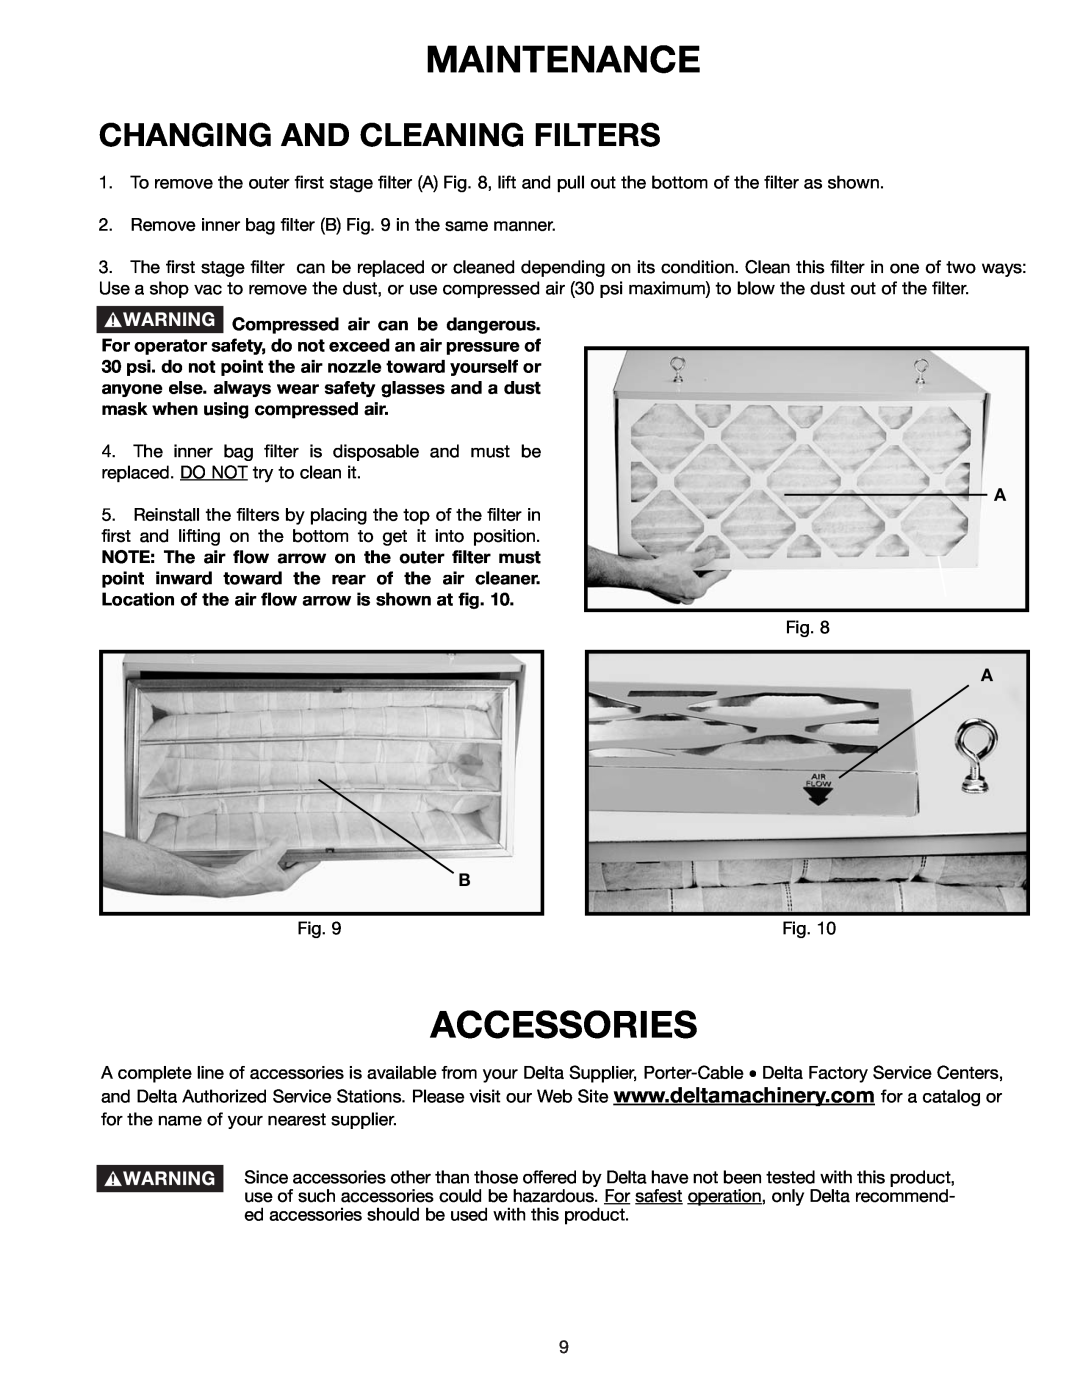 Deltaco 50-868 instruction manual Maintenance, Accessories, Changing And Cleaning Filters 